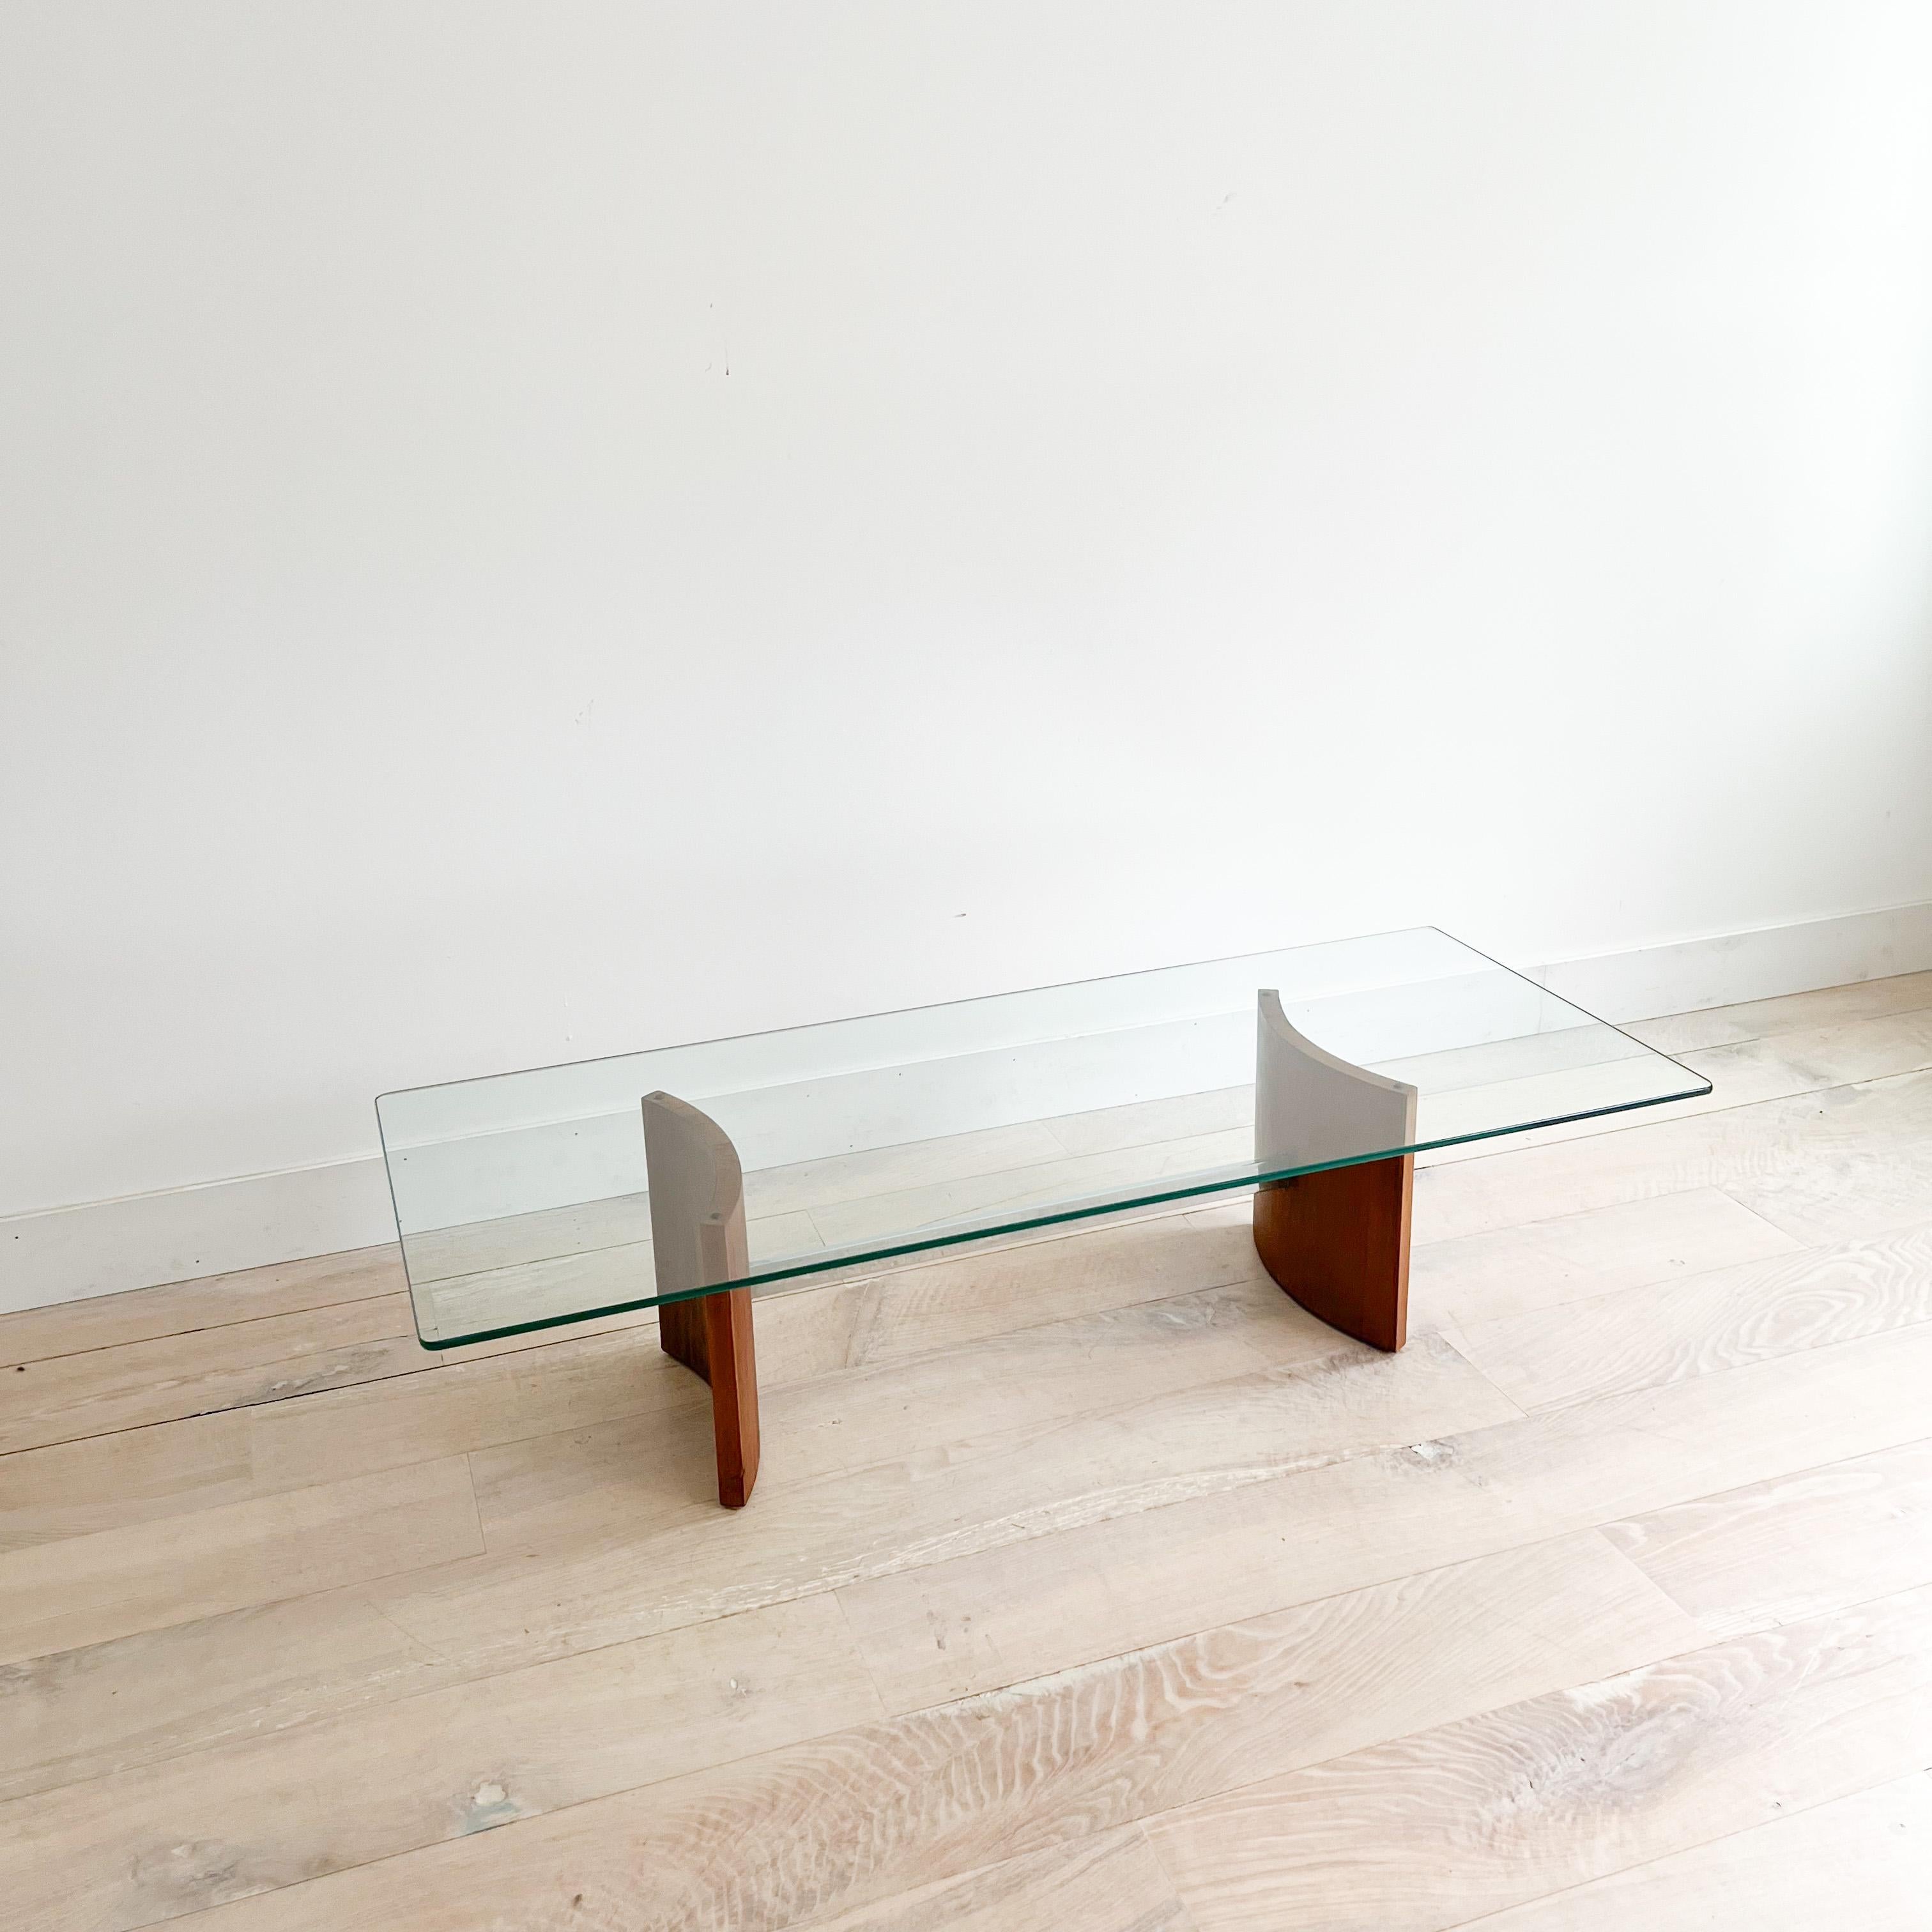 Indulge in the timeless allure of mid-century design with this exquisite coffee table designed by Vladimir Kagan and proudly manufactured by Selig in the United States during the 1960s.
This sculptural coffee table is a testament to the era's design